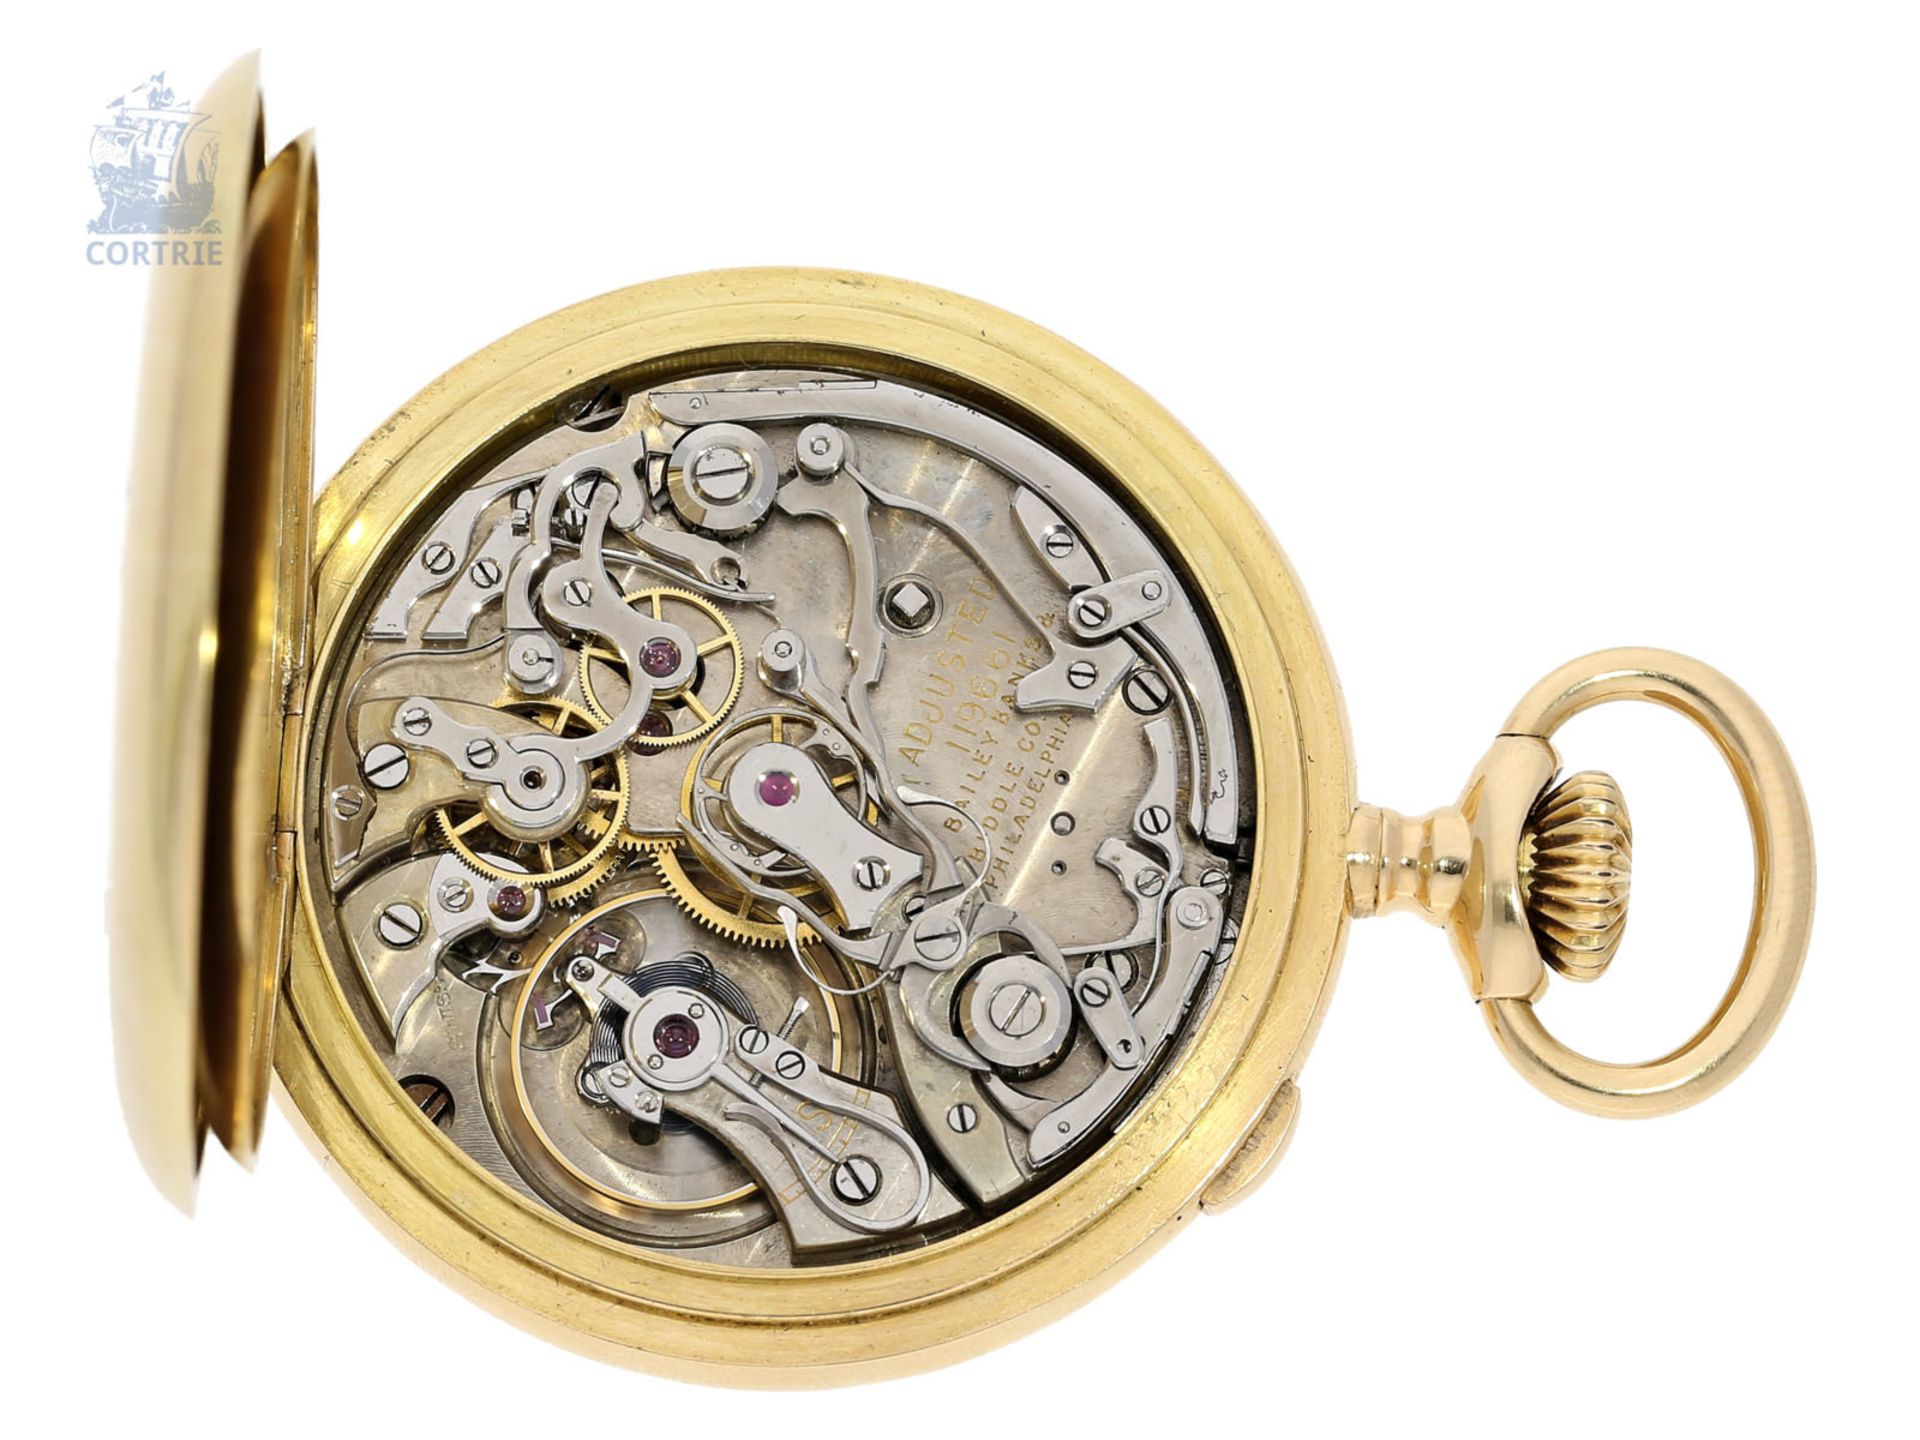 Pocket watch: very fine, small chronograph Rattrapante, gold/enamel case, Bailey, Banks & Biddle, no - Image 6 of 7